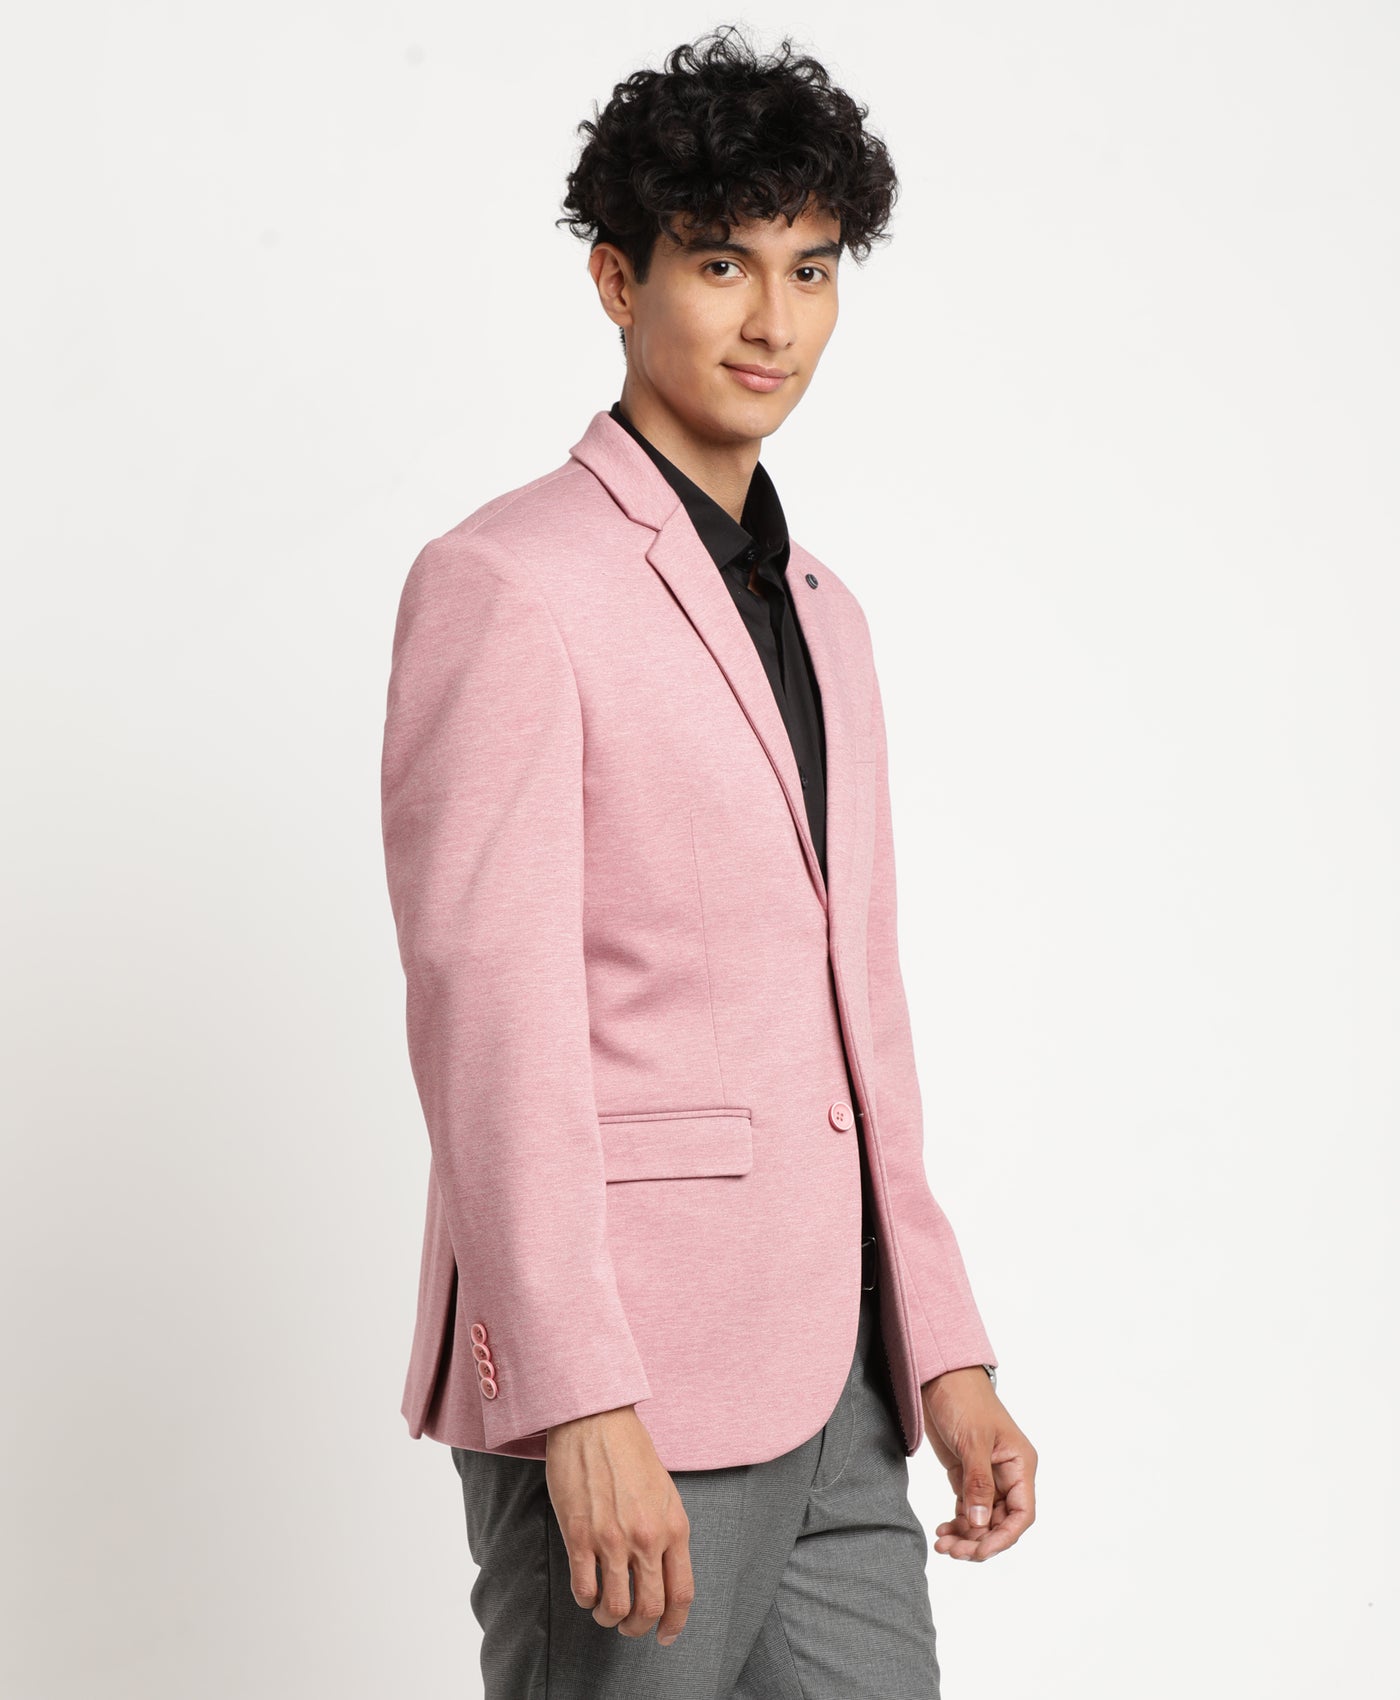 Pink Knitted Self Design Casual Blazer